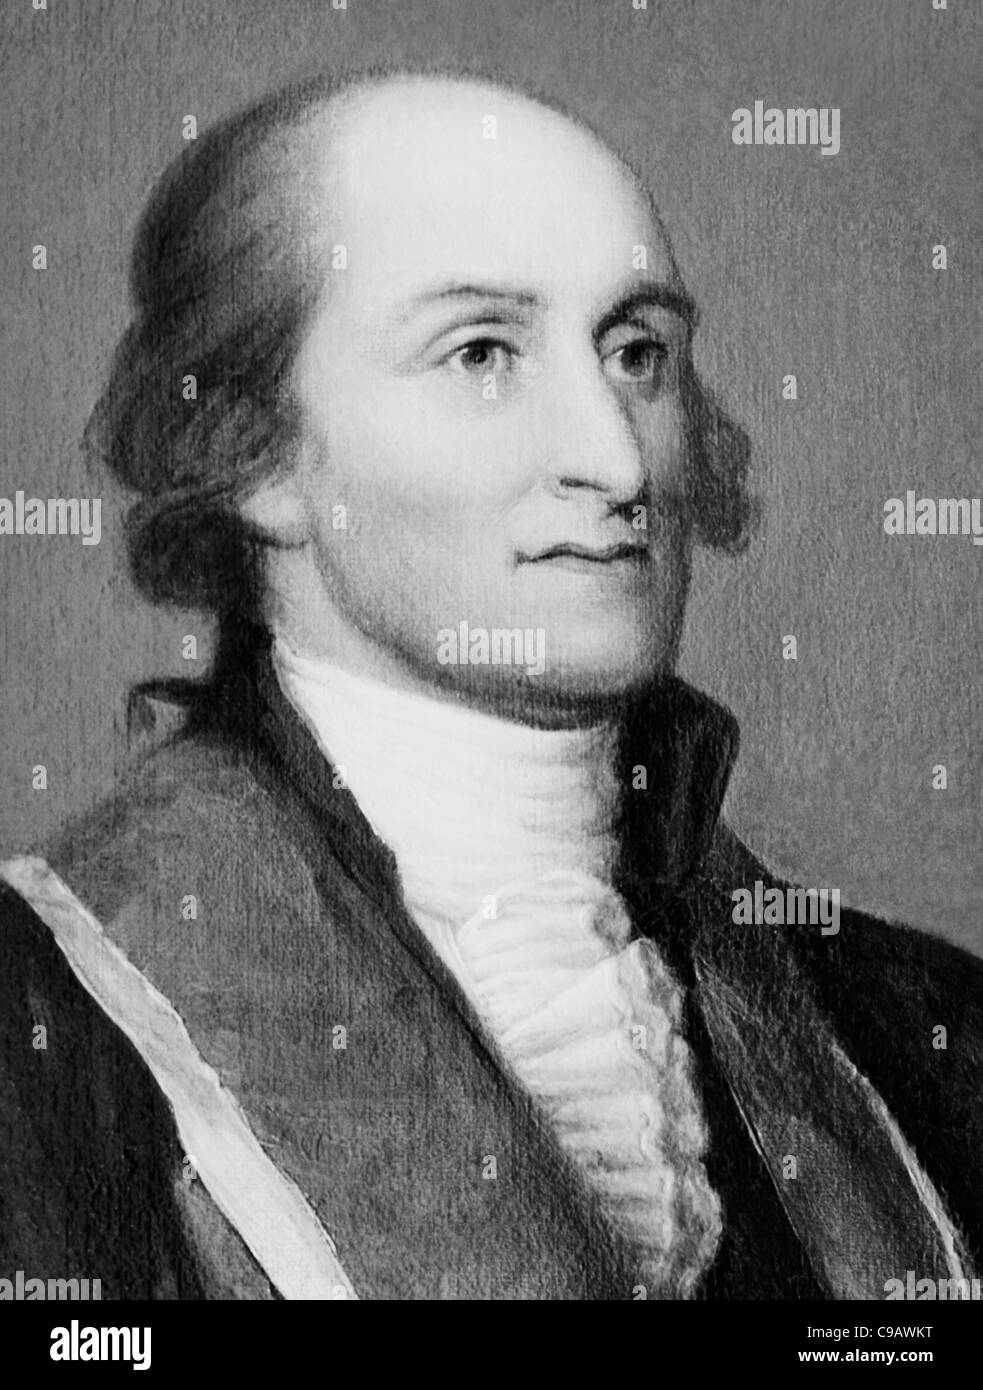 Vintage portrait painting of American statesman, diplomat and lawyer John Jay (1745 - 1829) - the first US Chief Justice (1789 - 1795). Stock Photo